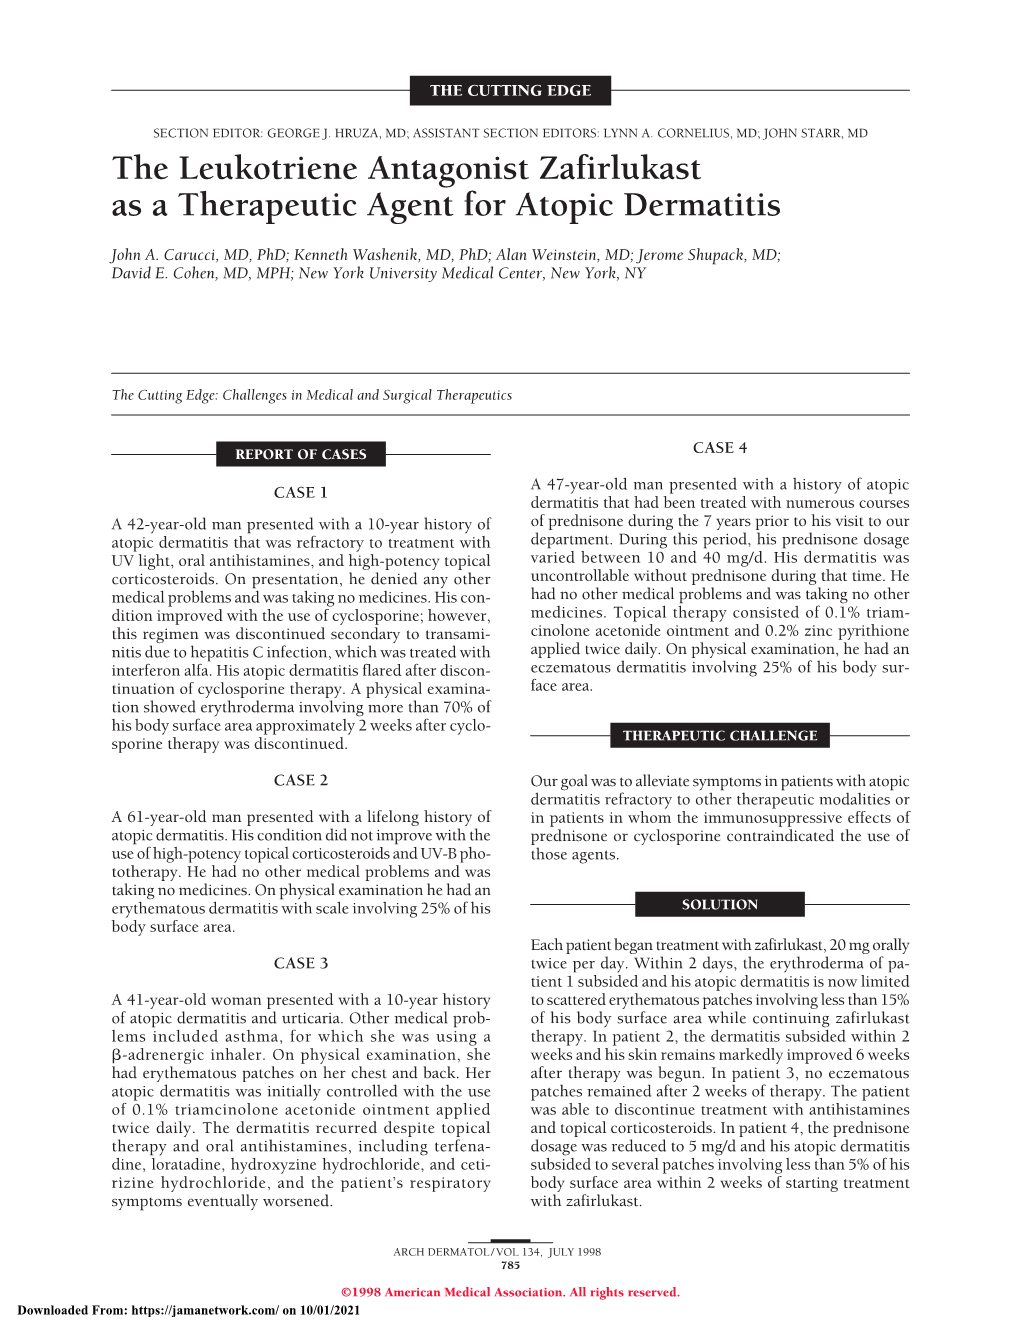 The Leukotriene Antagonist Zafirlukast As a Therapeutic Agent for Atopic Dermatitis